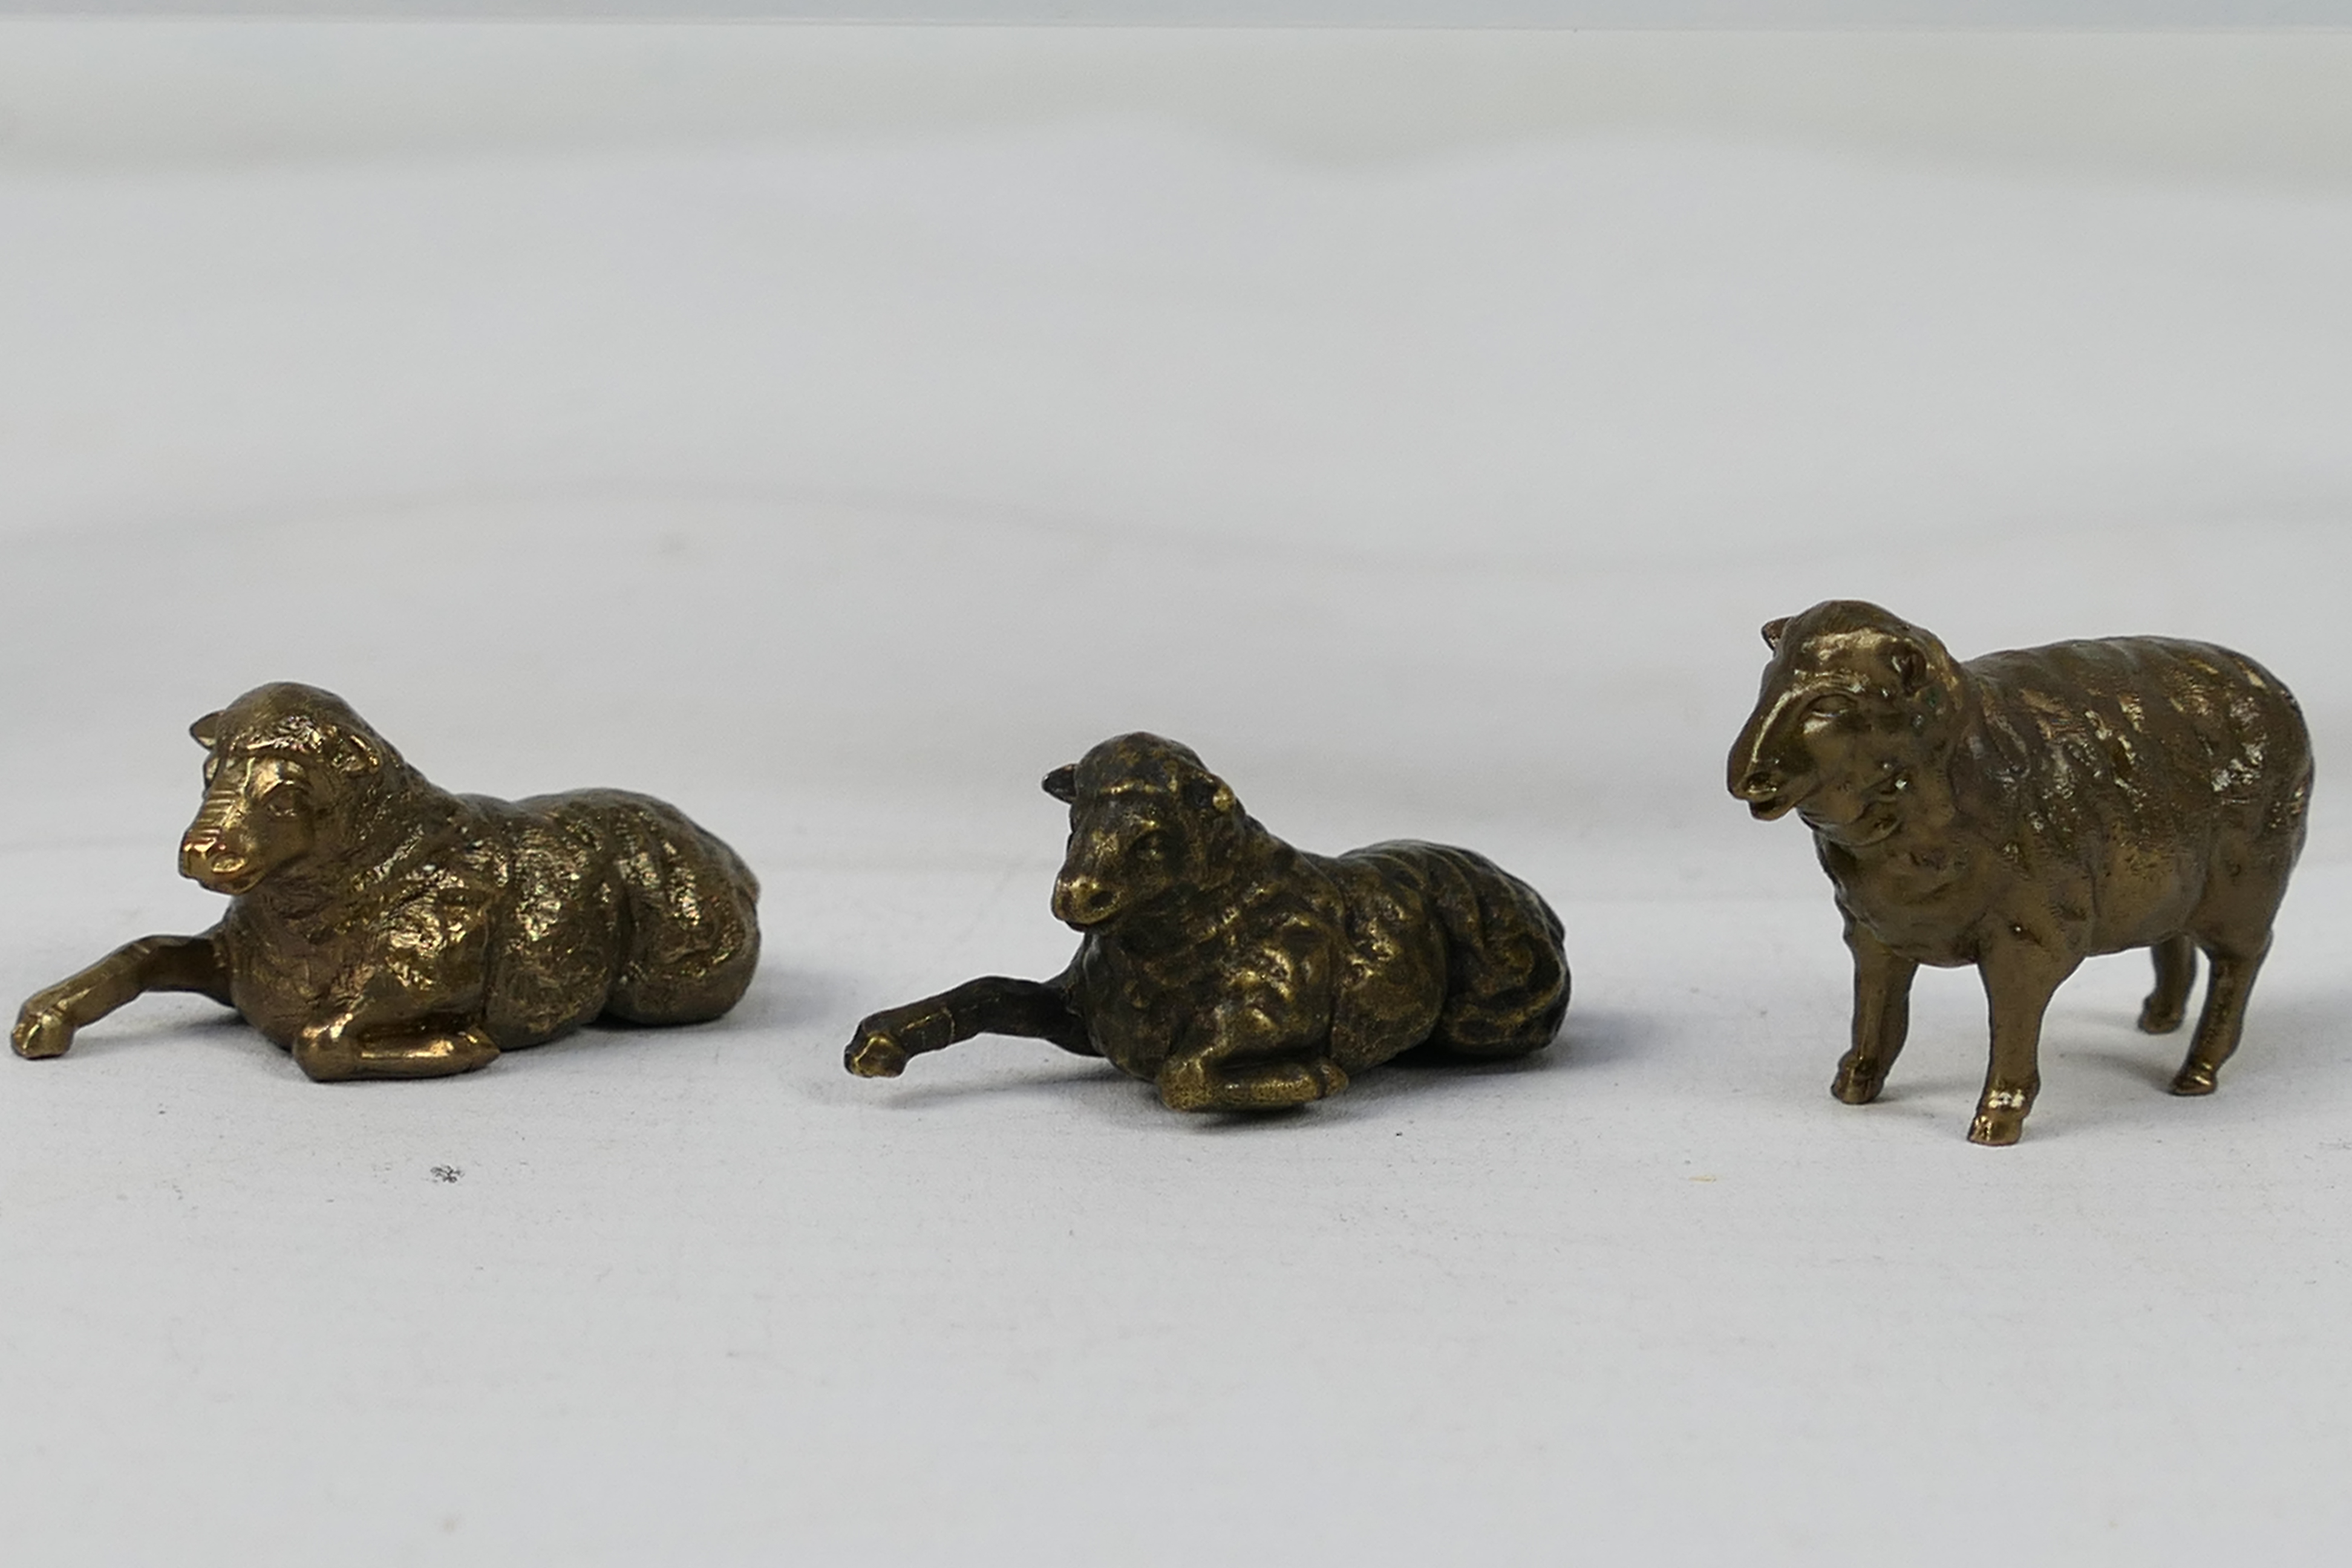 8 x small bronze sheep figures. All in s - Image 4 of 5